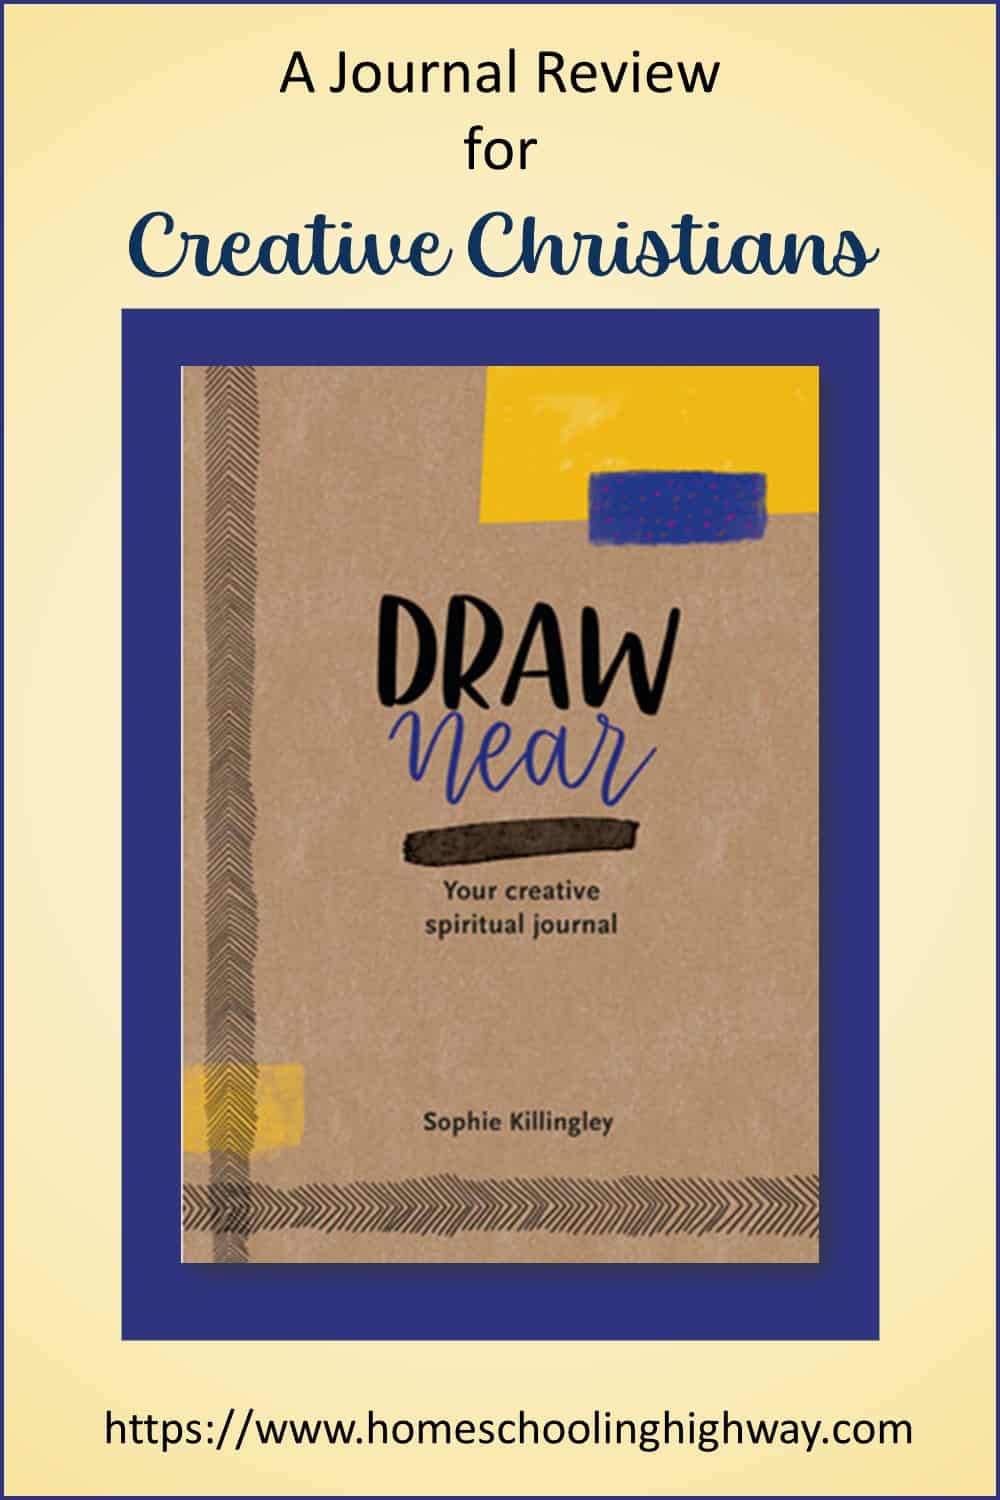 Draw Near. Your Creative Spiritual Journal. Reviewed by Homeschooling Highway